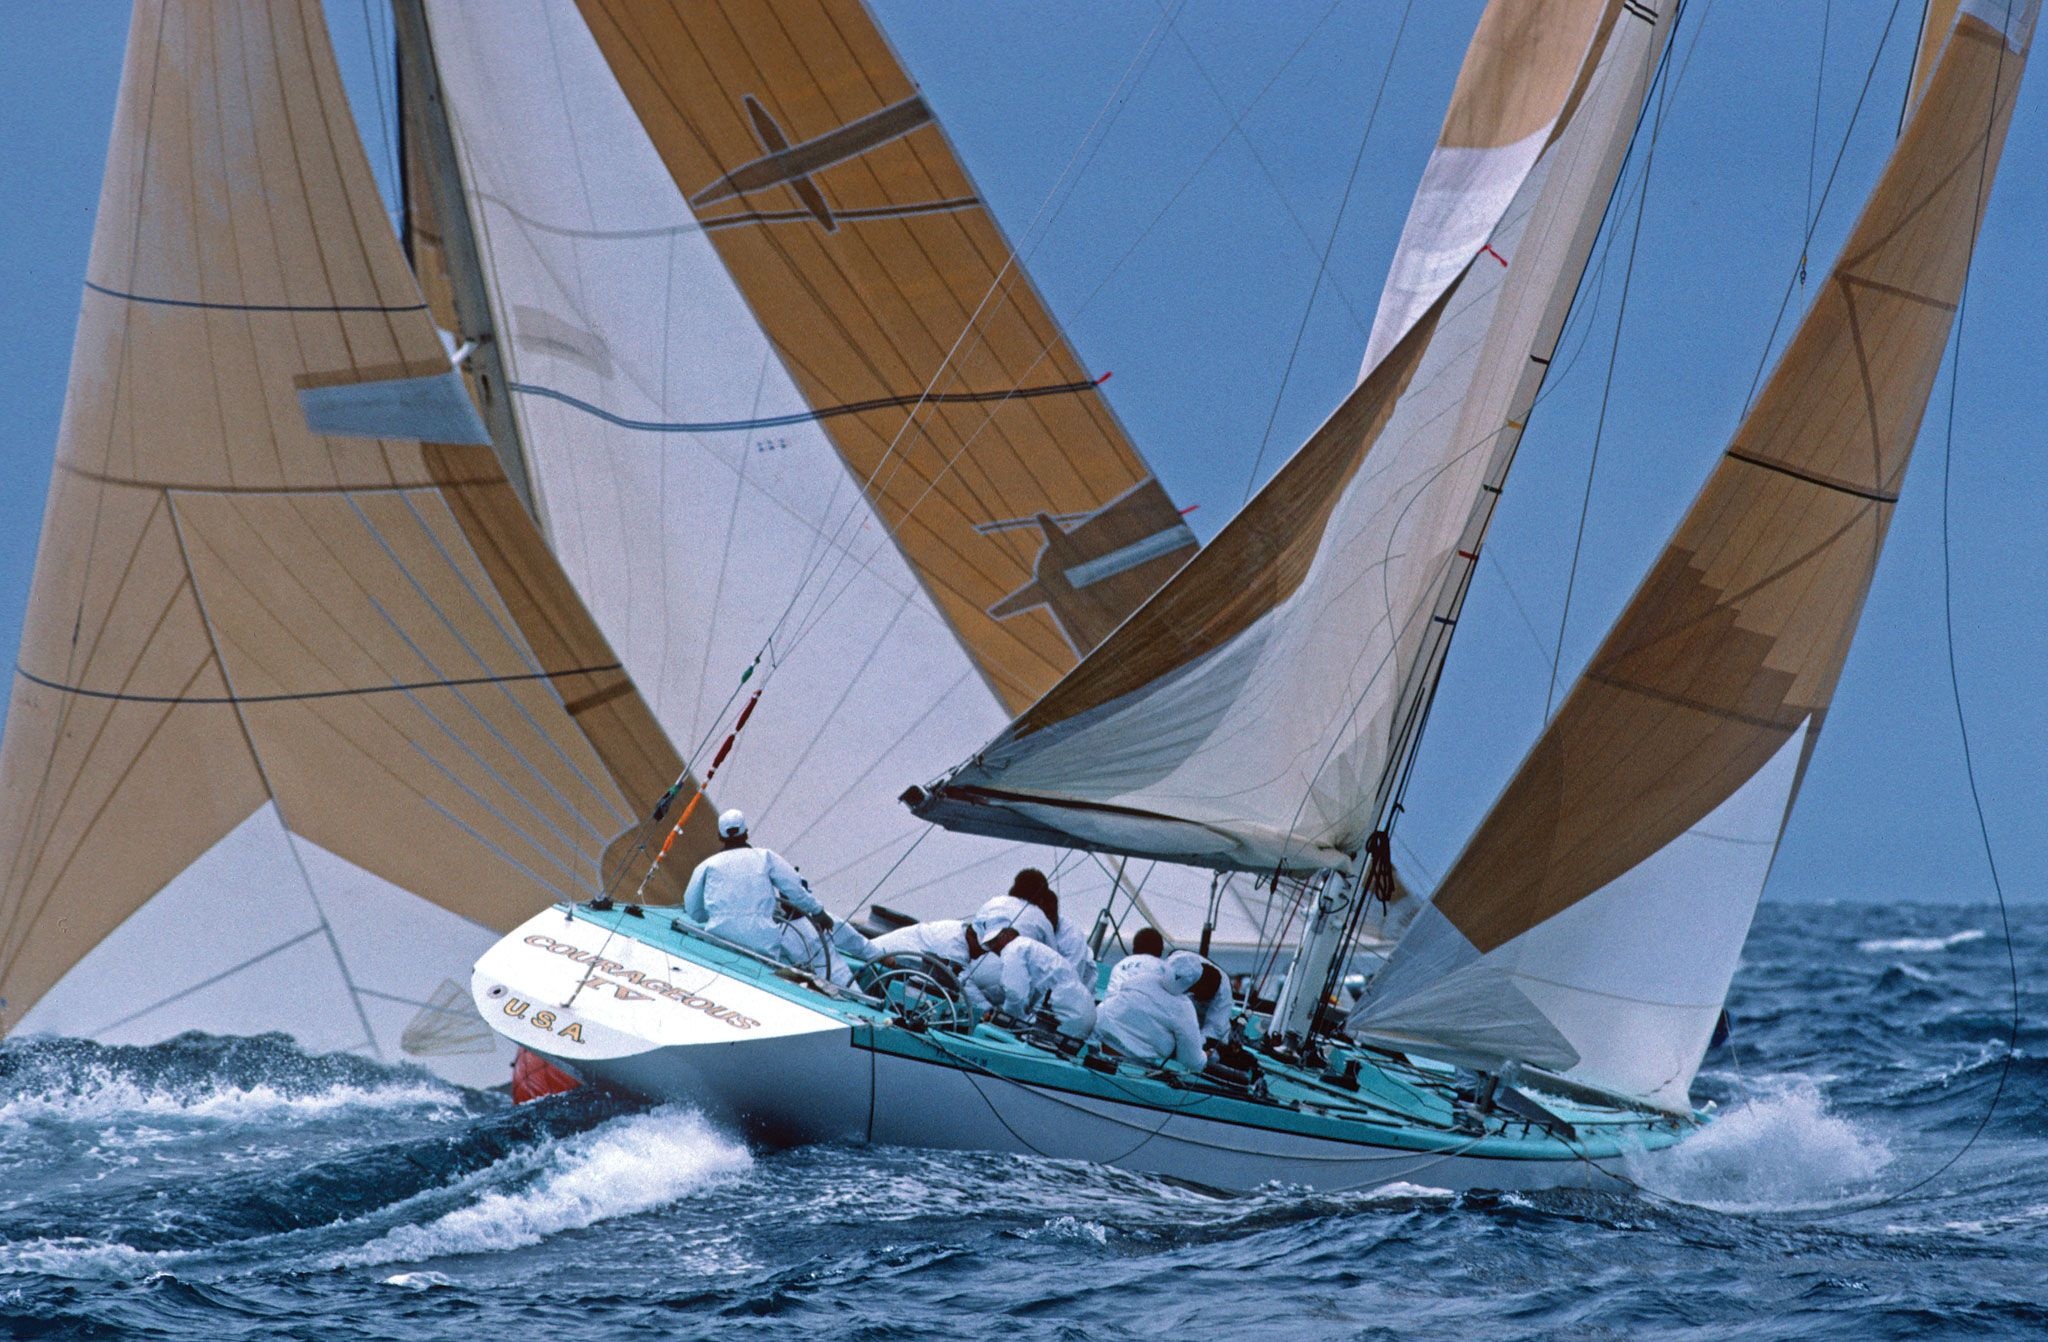 Yacht Racing: Ehman's San Francisco Yacht Racing Challenge, Water competition. 2050x1350 HD Background.